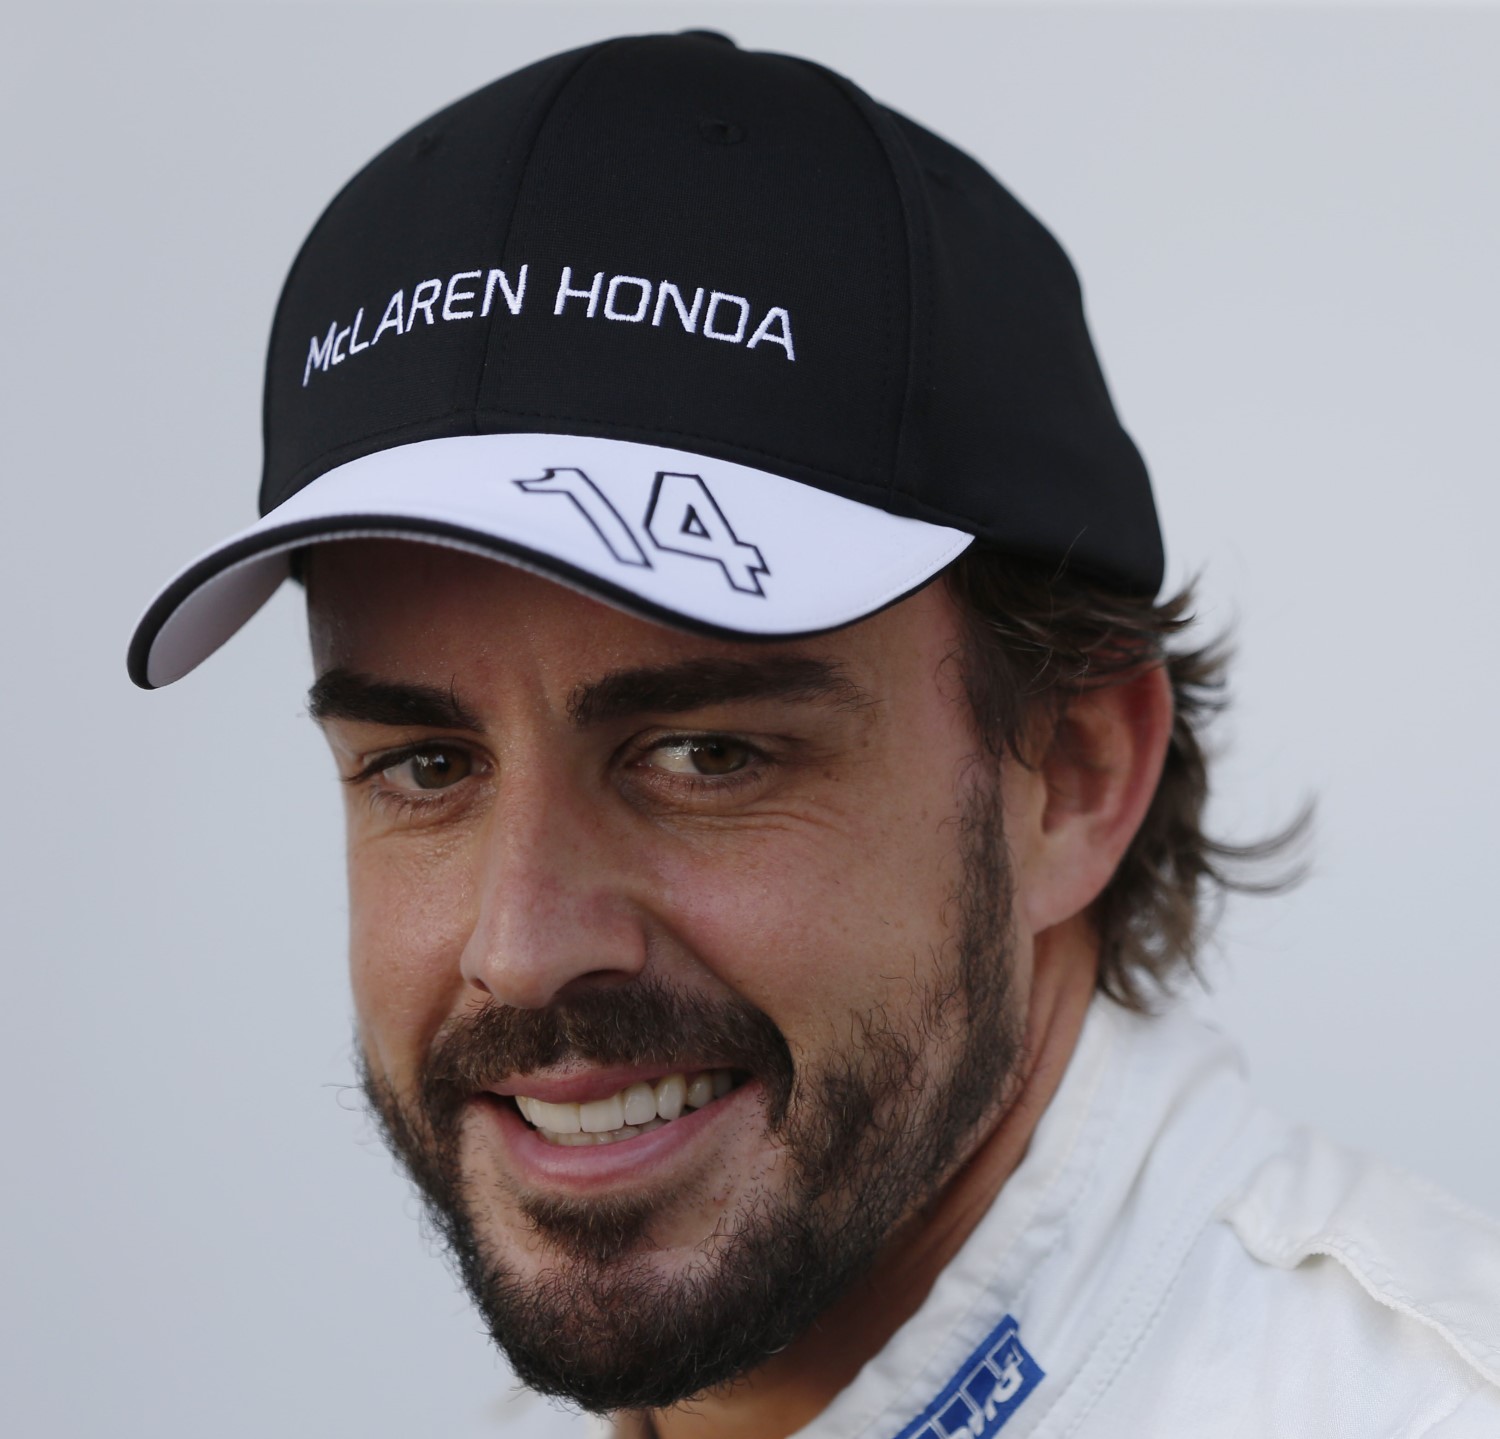 McLaren says Alonso is happy with them